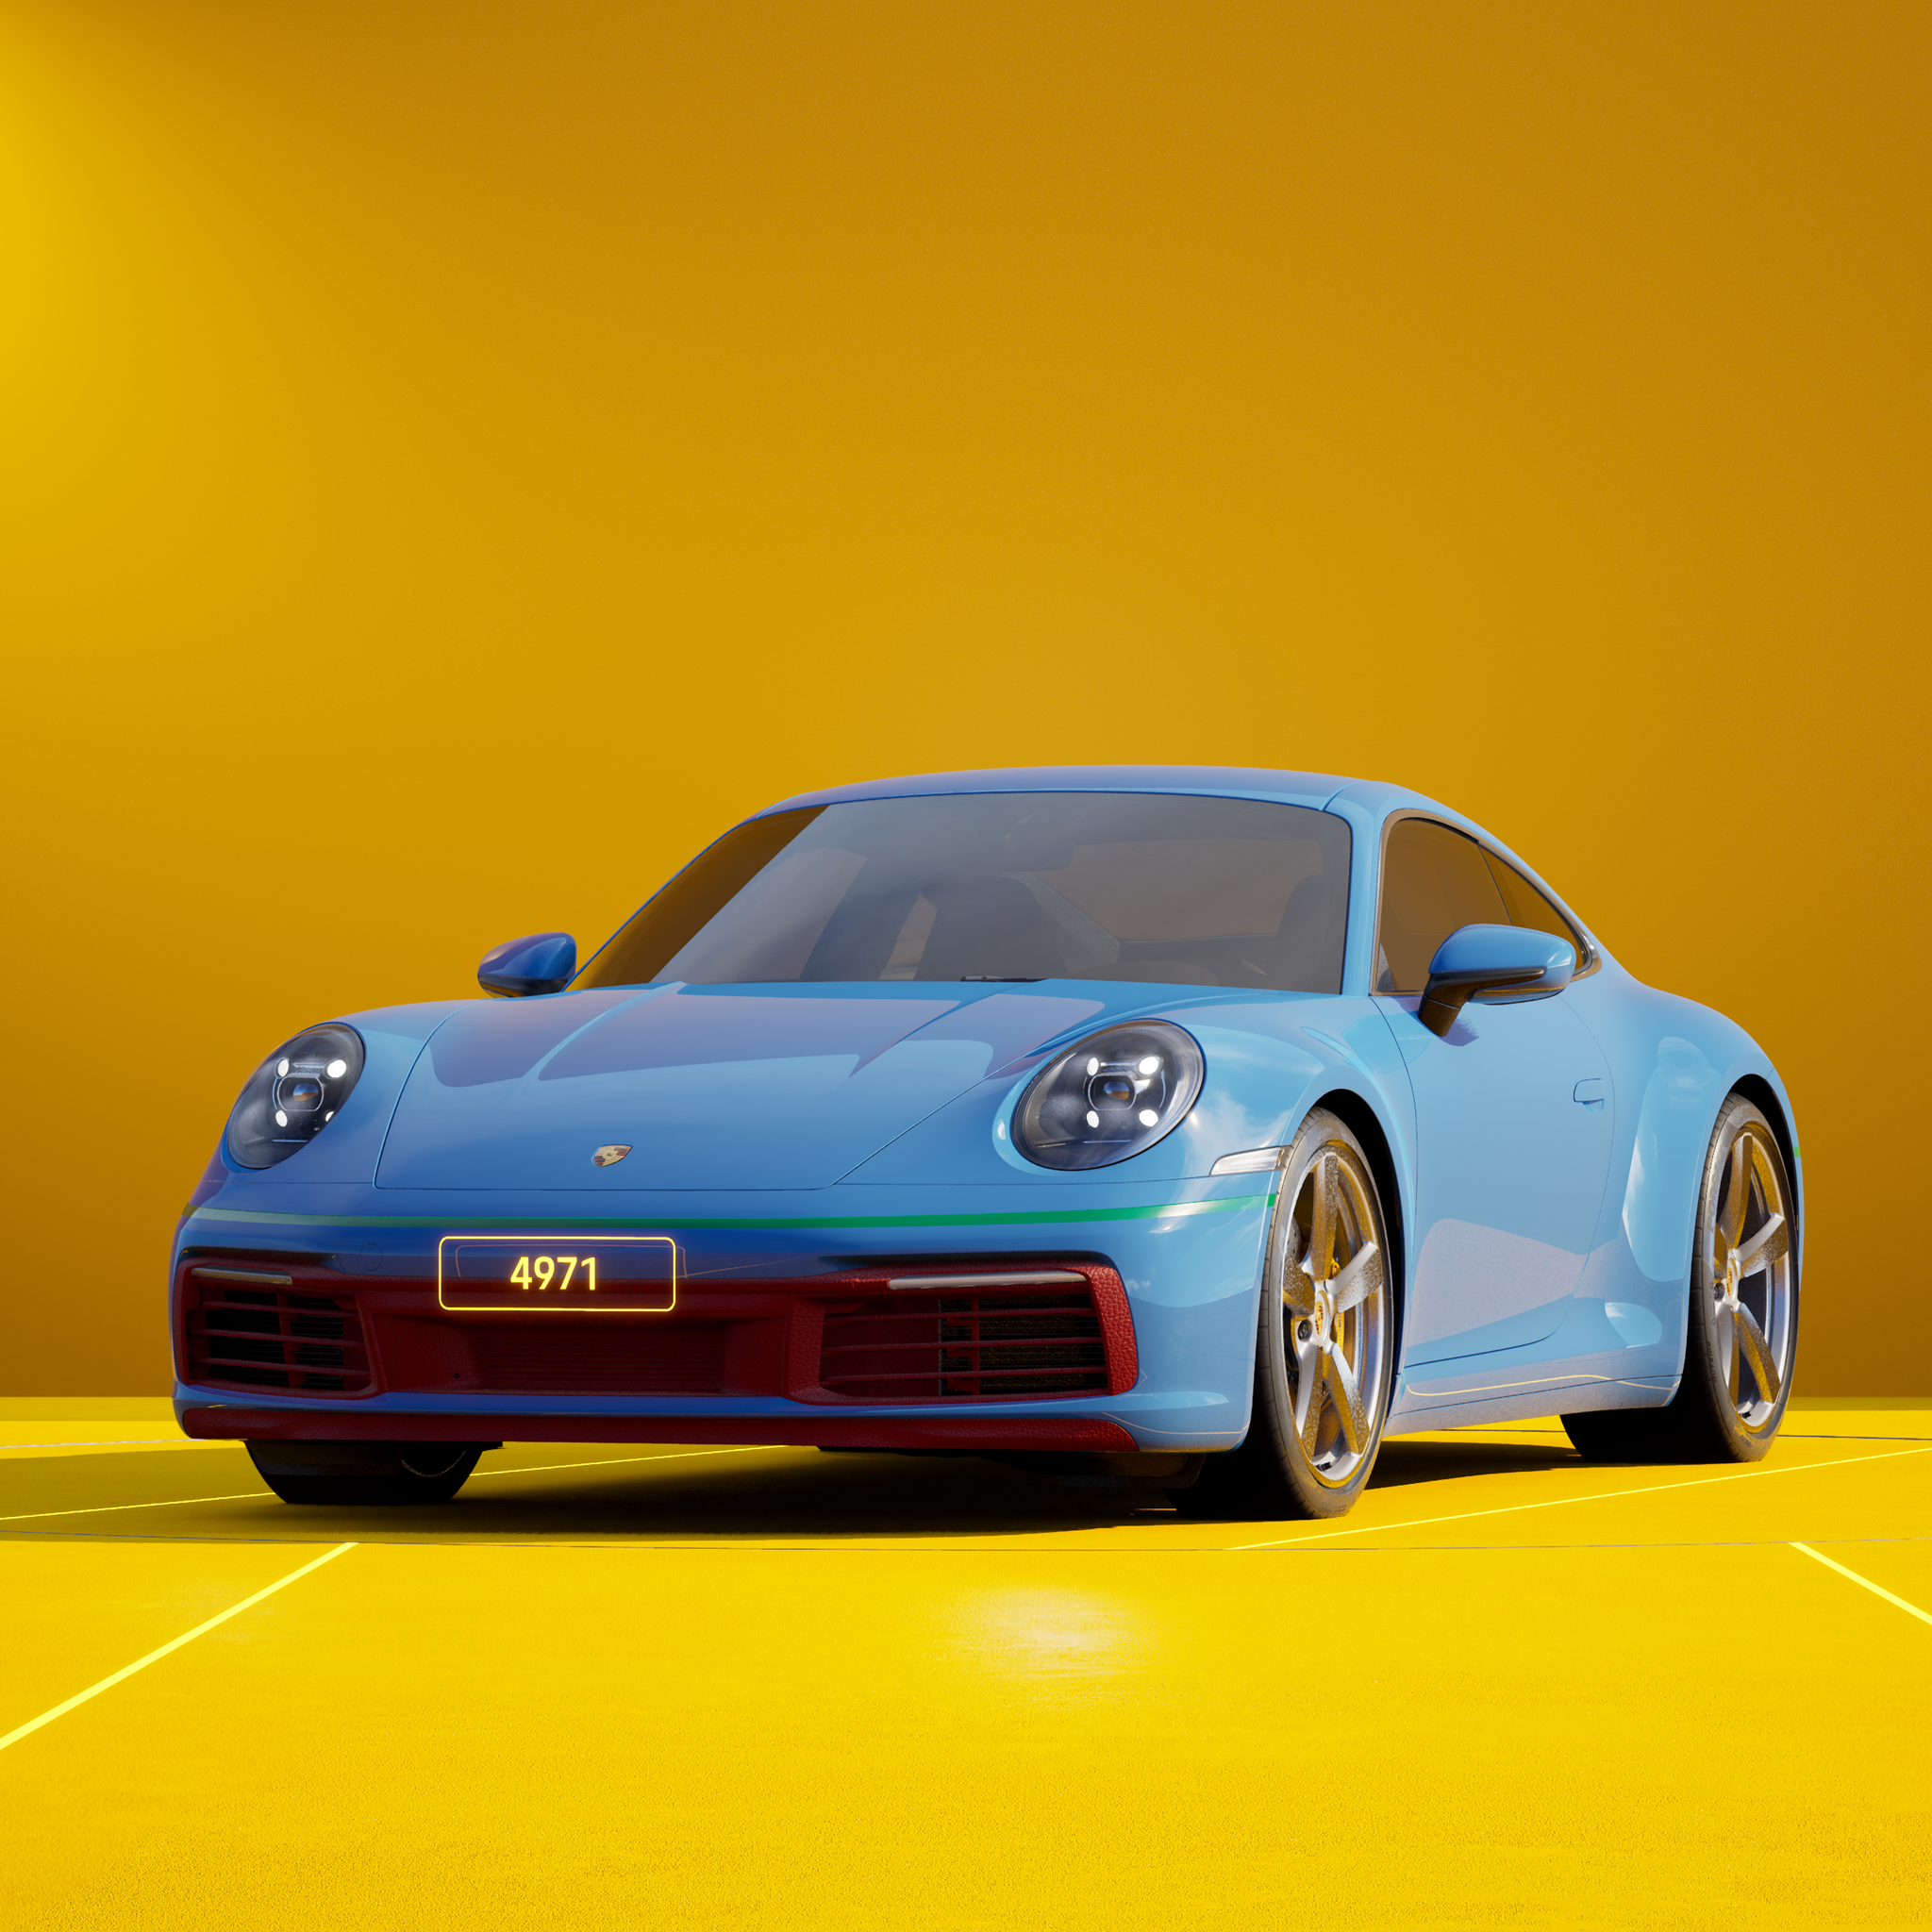 The PORSCHΞ 911 4971 image in phase